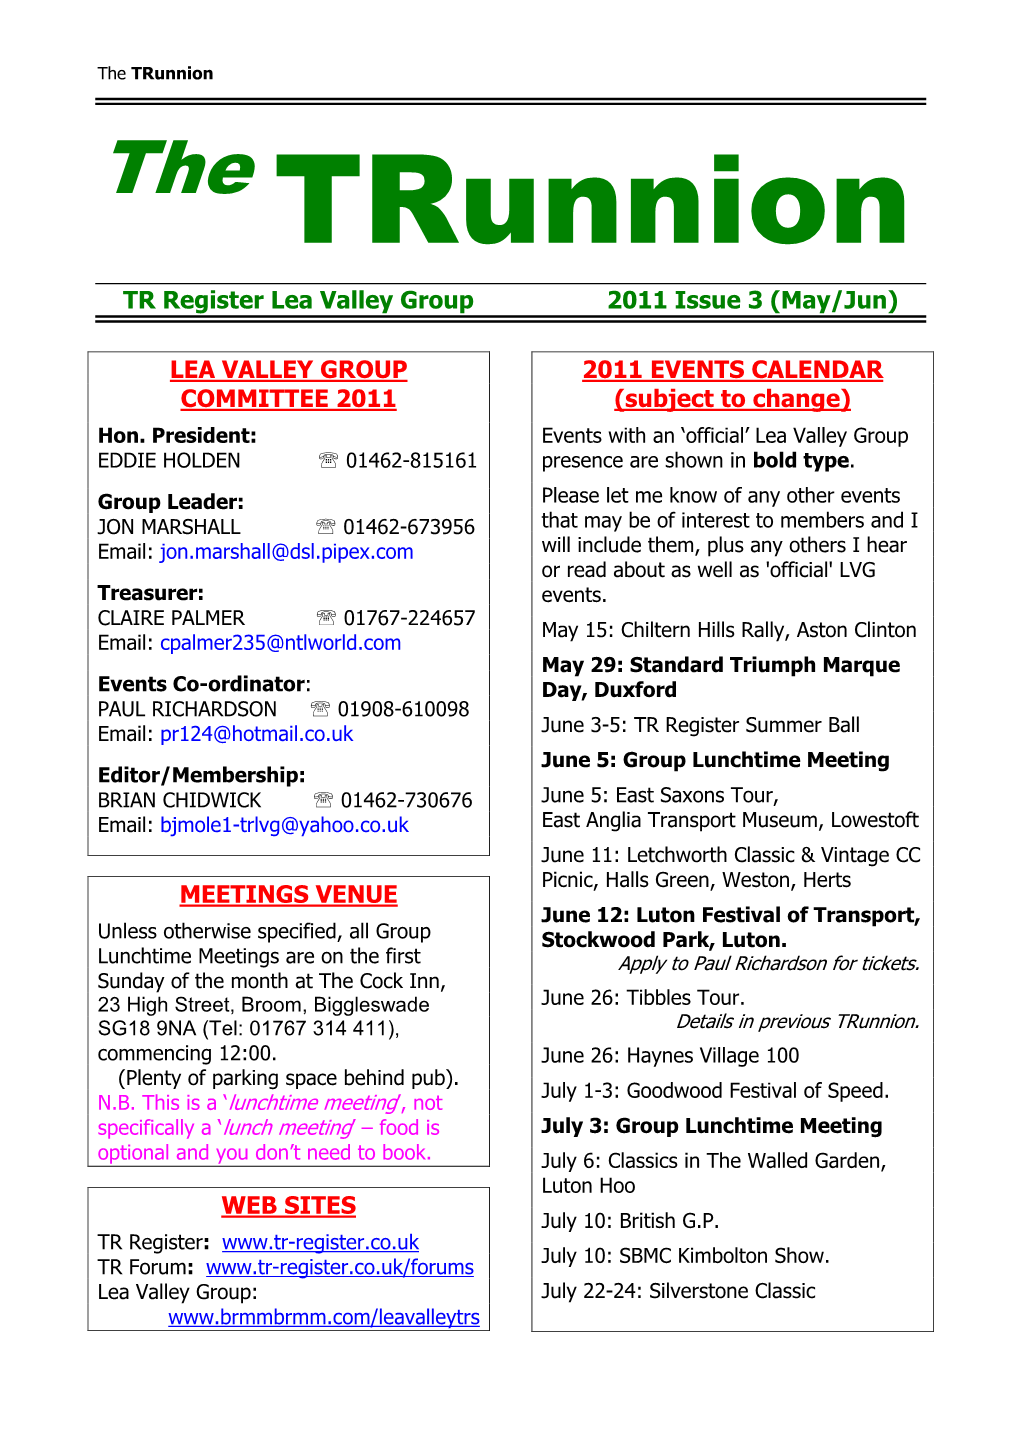 The Trunnion the Trunnion TR Register Lea Valley Group 2011 Issue 3 (May/Jun)